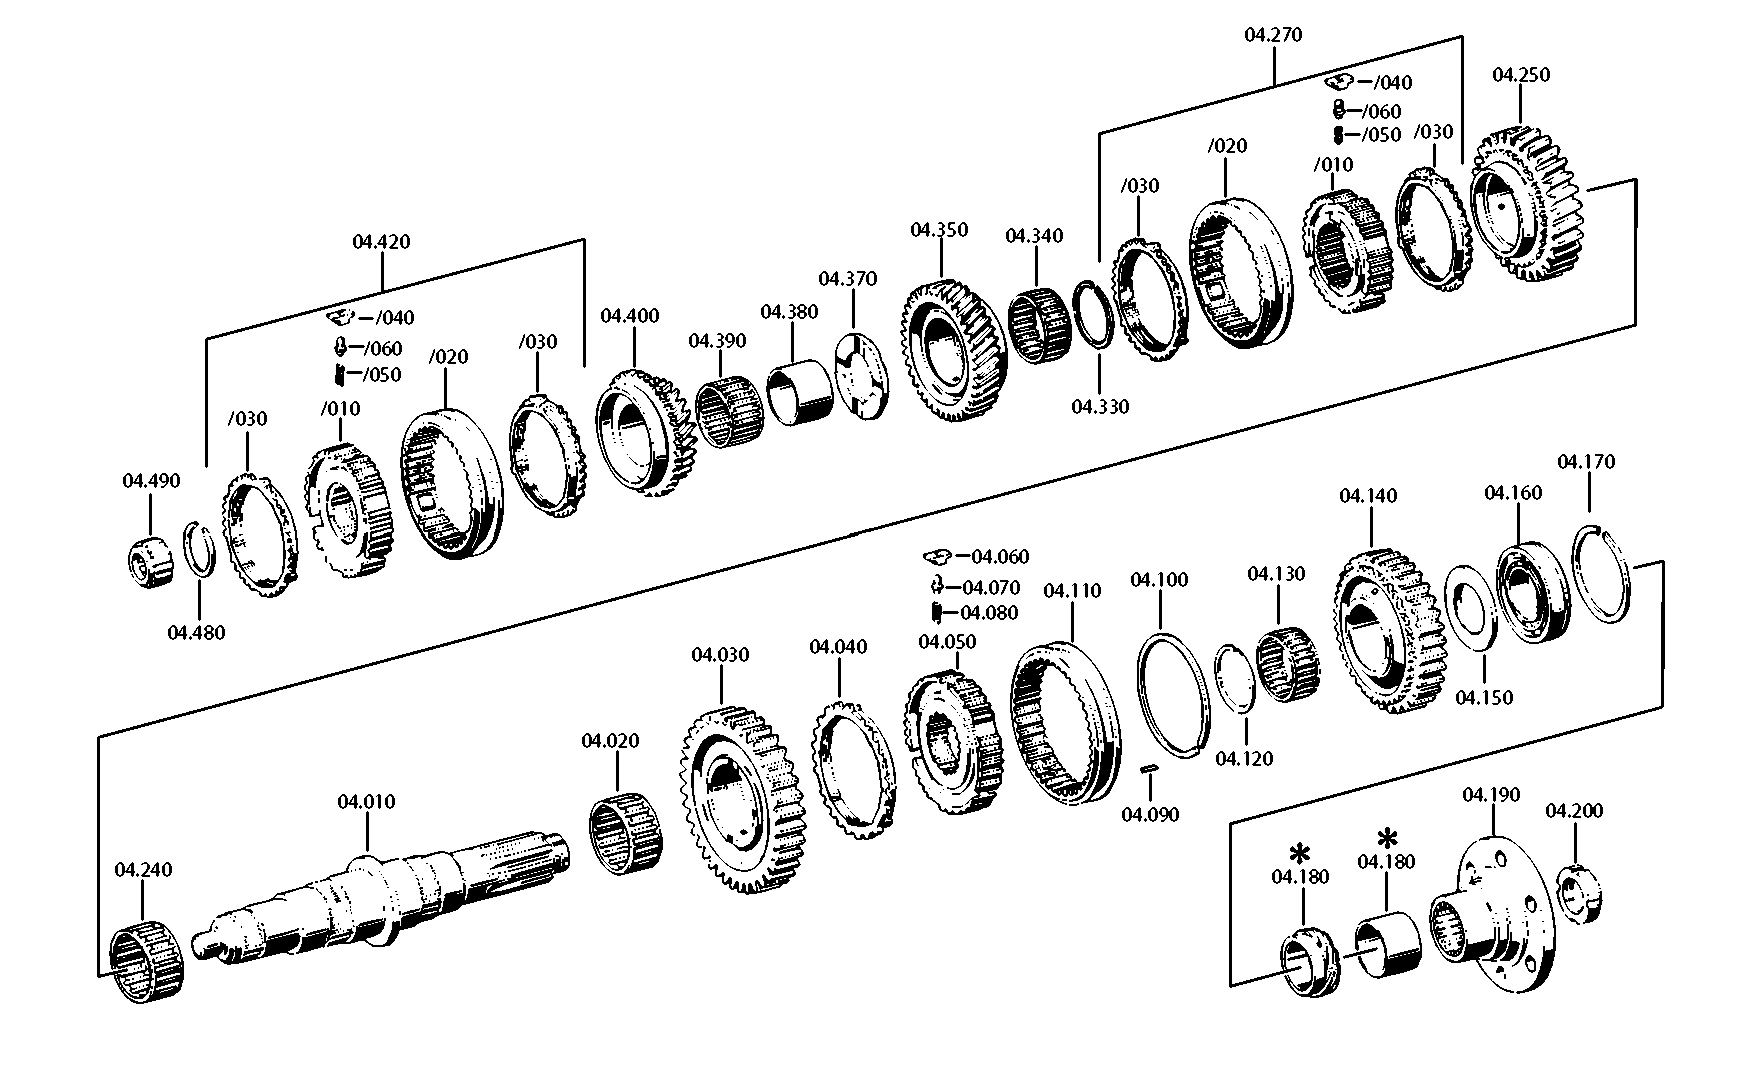 drawing for SKF 170743 - NEEDLE CAGE (figure 2)